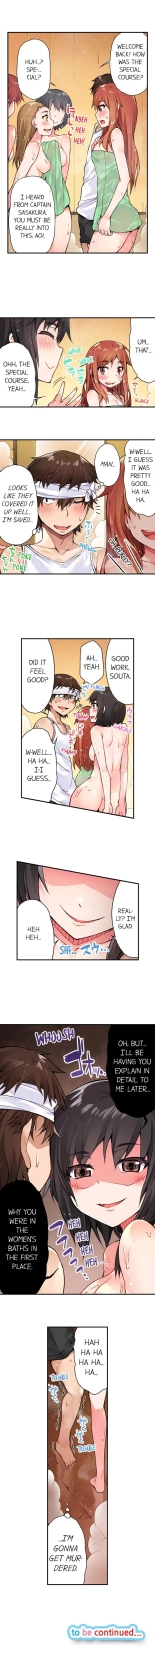 Traditional Job of Washing Girls' Body Ch. 1-171 : page 136